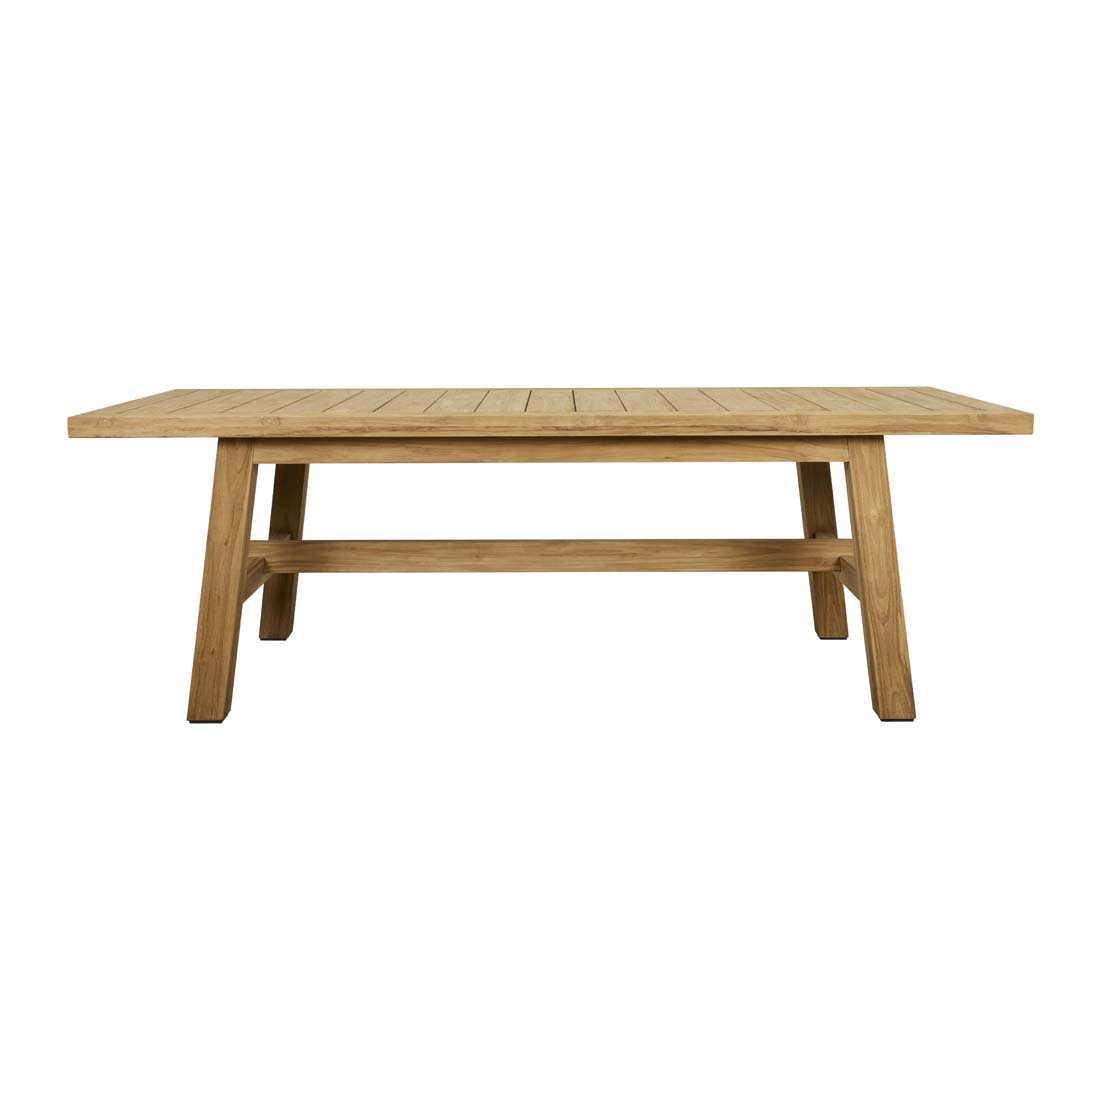 Aspen Dining Table image 0